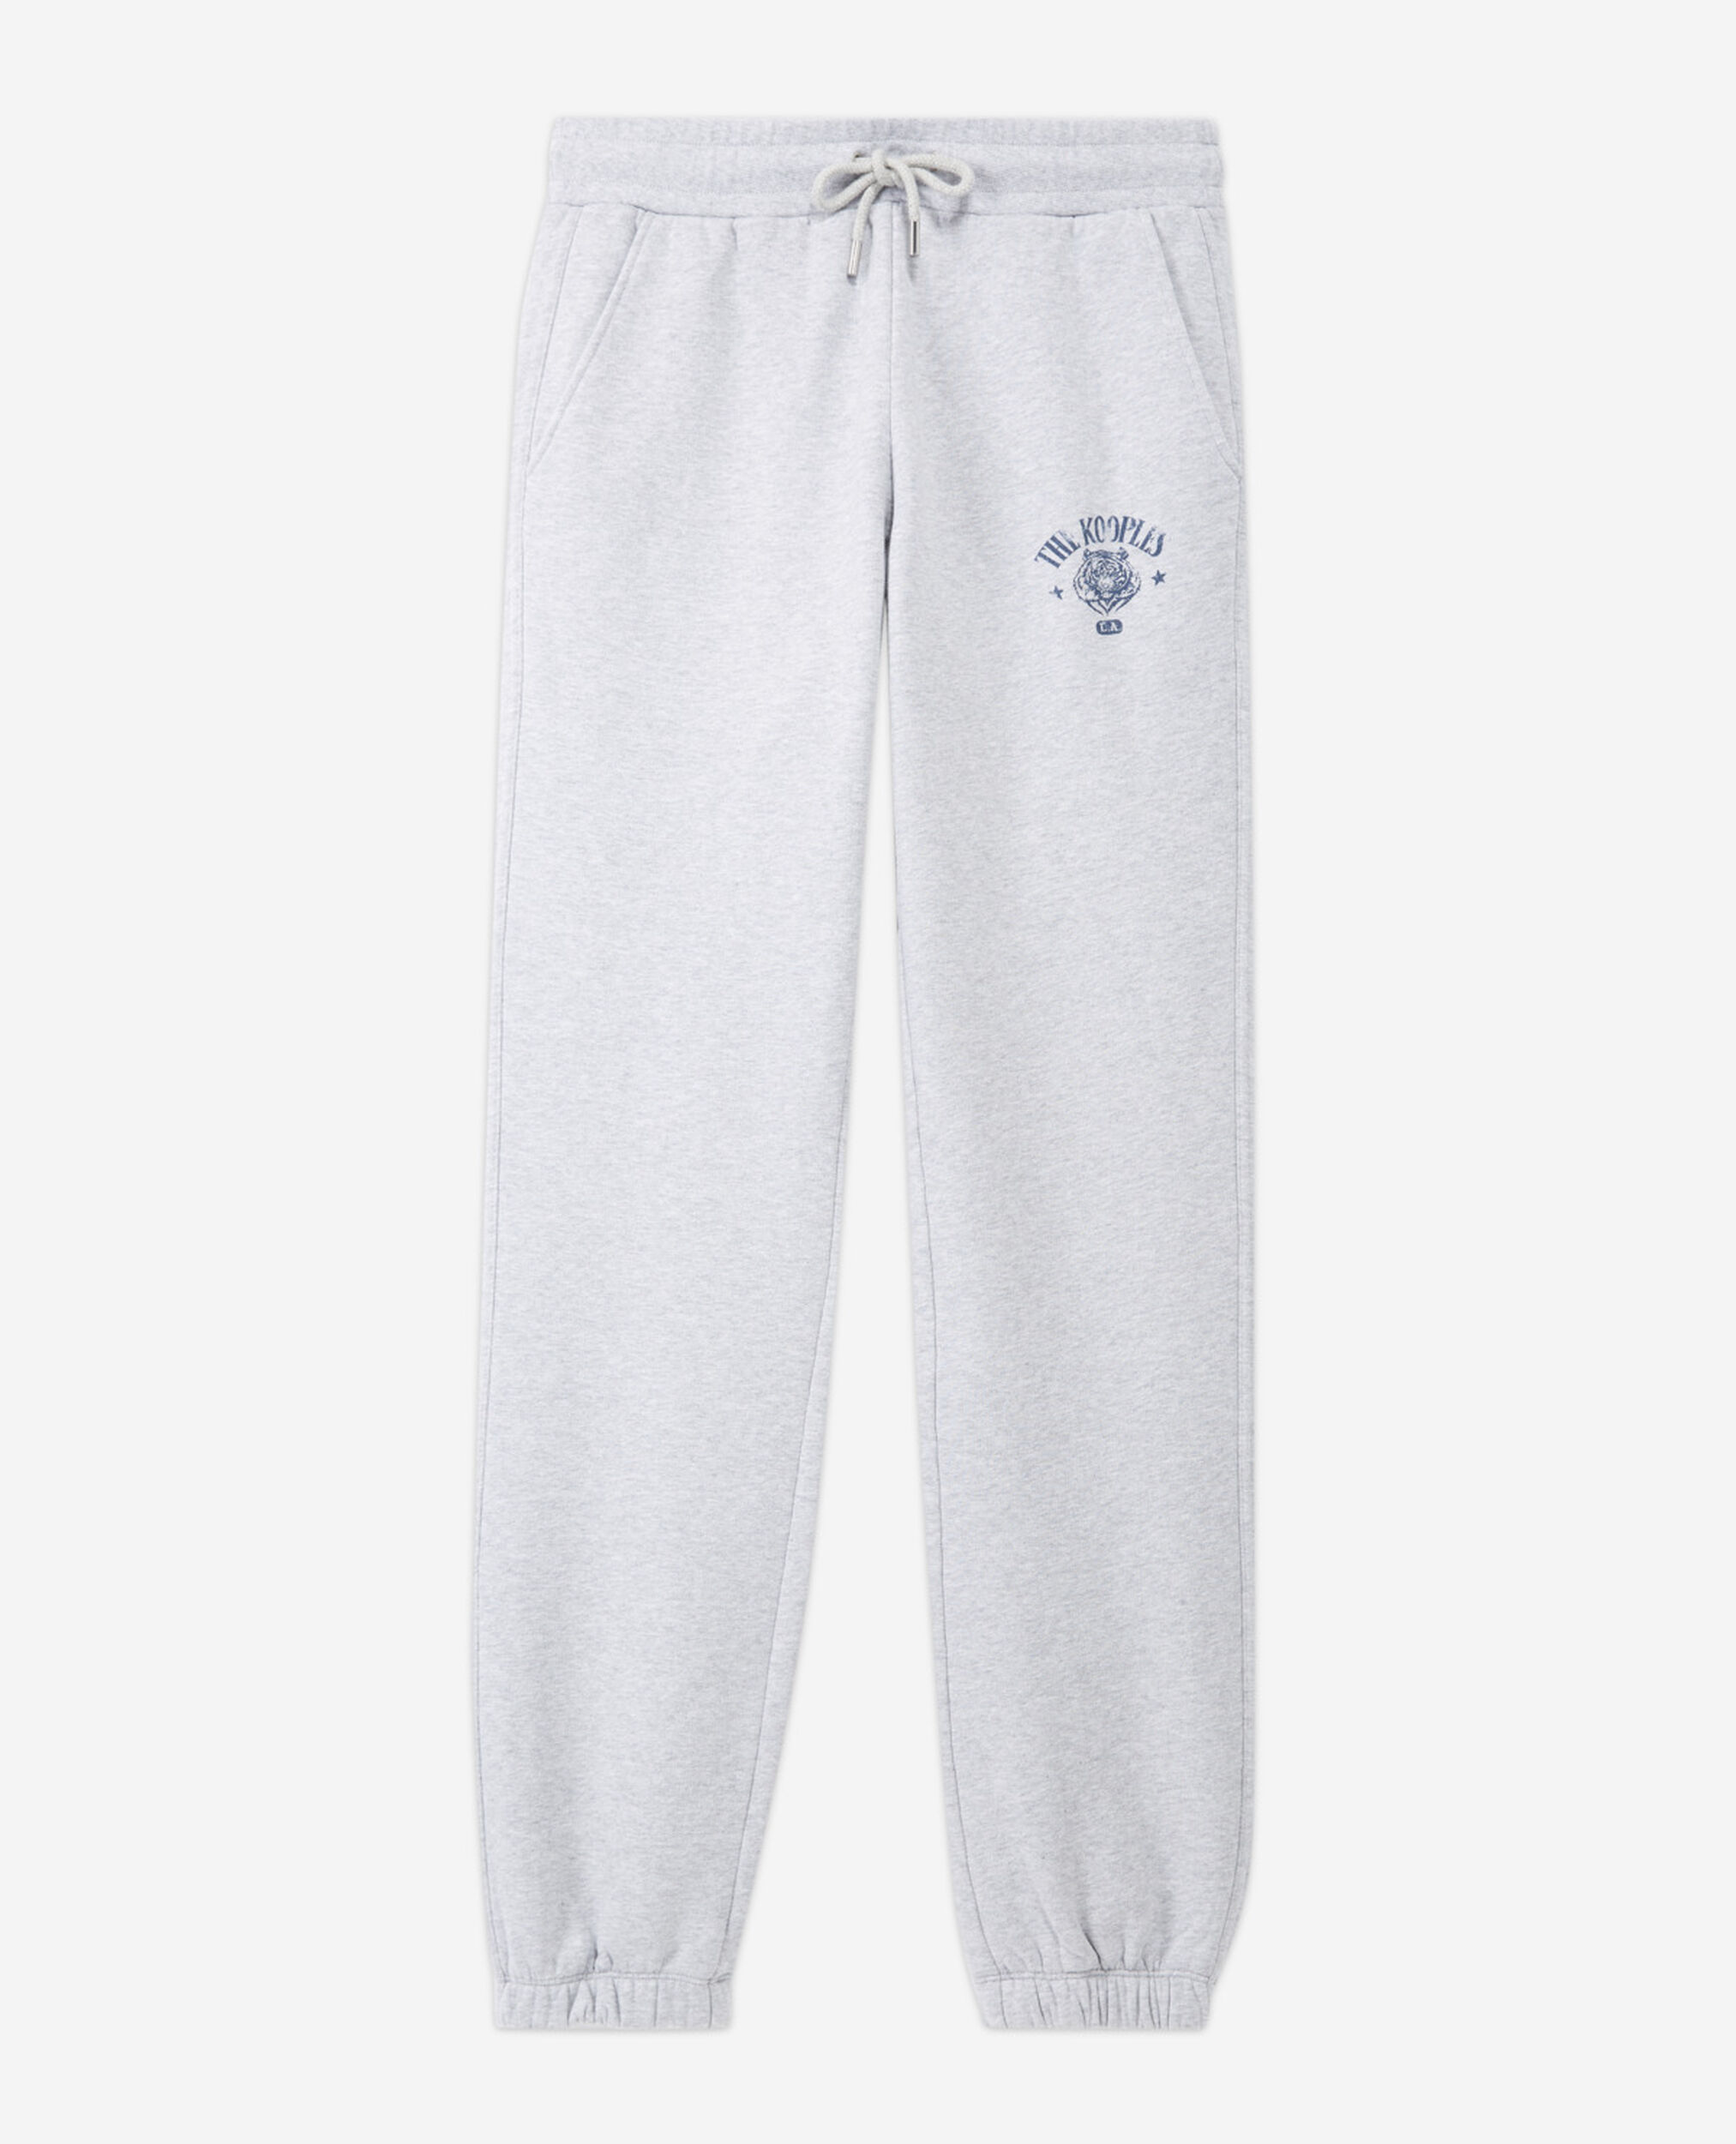 Cuts: LIMITED STOCK: The Pacific Blue AO Jogger